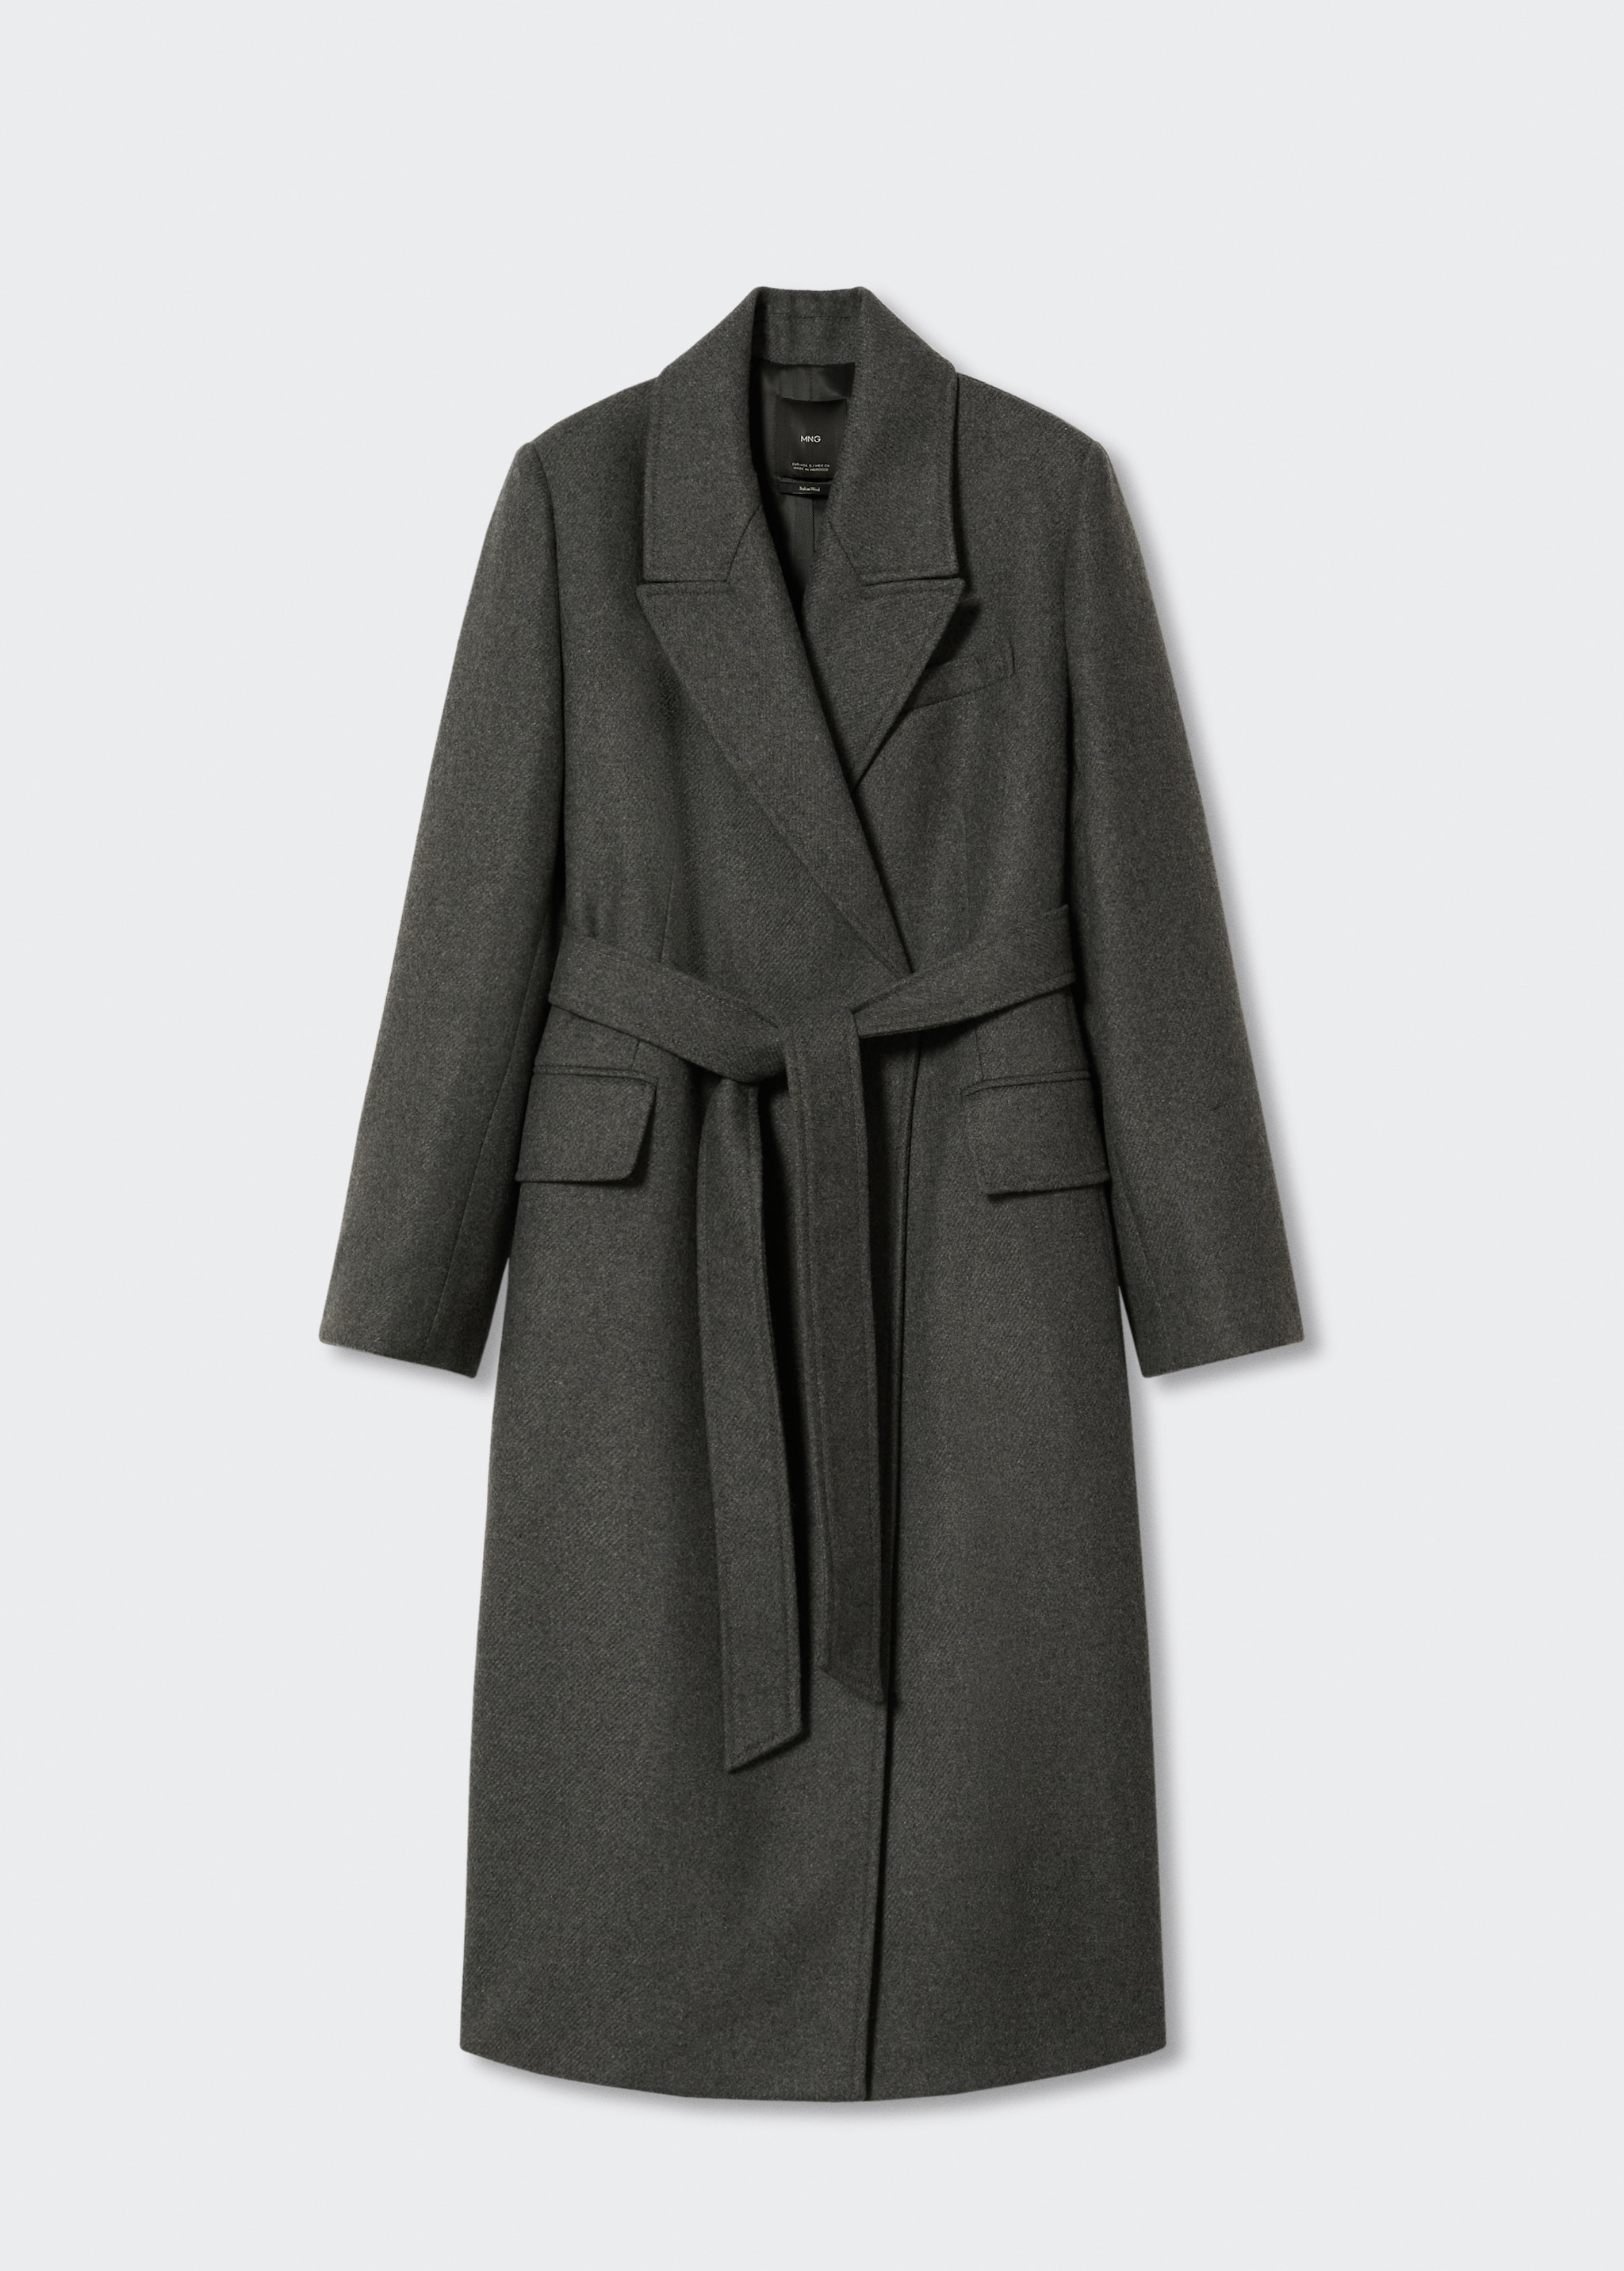 Long coat with lapels - Article without model